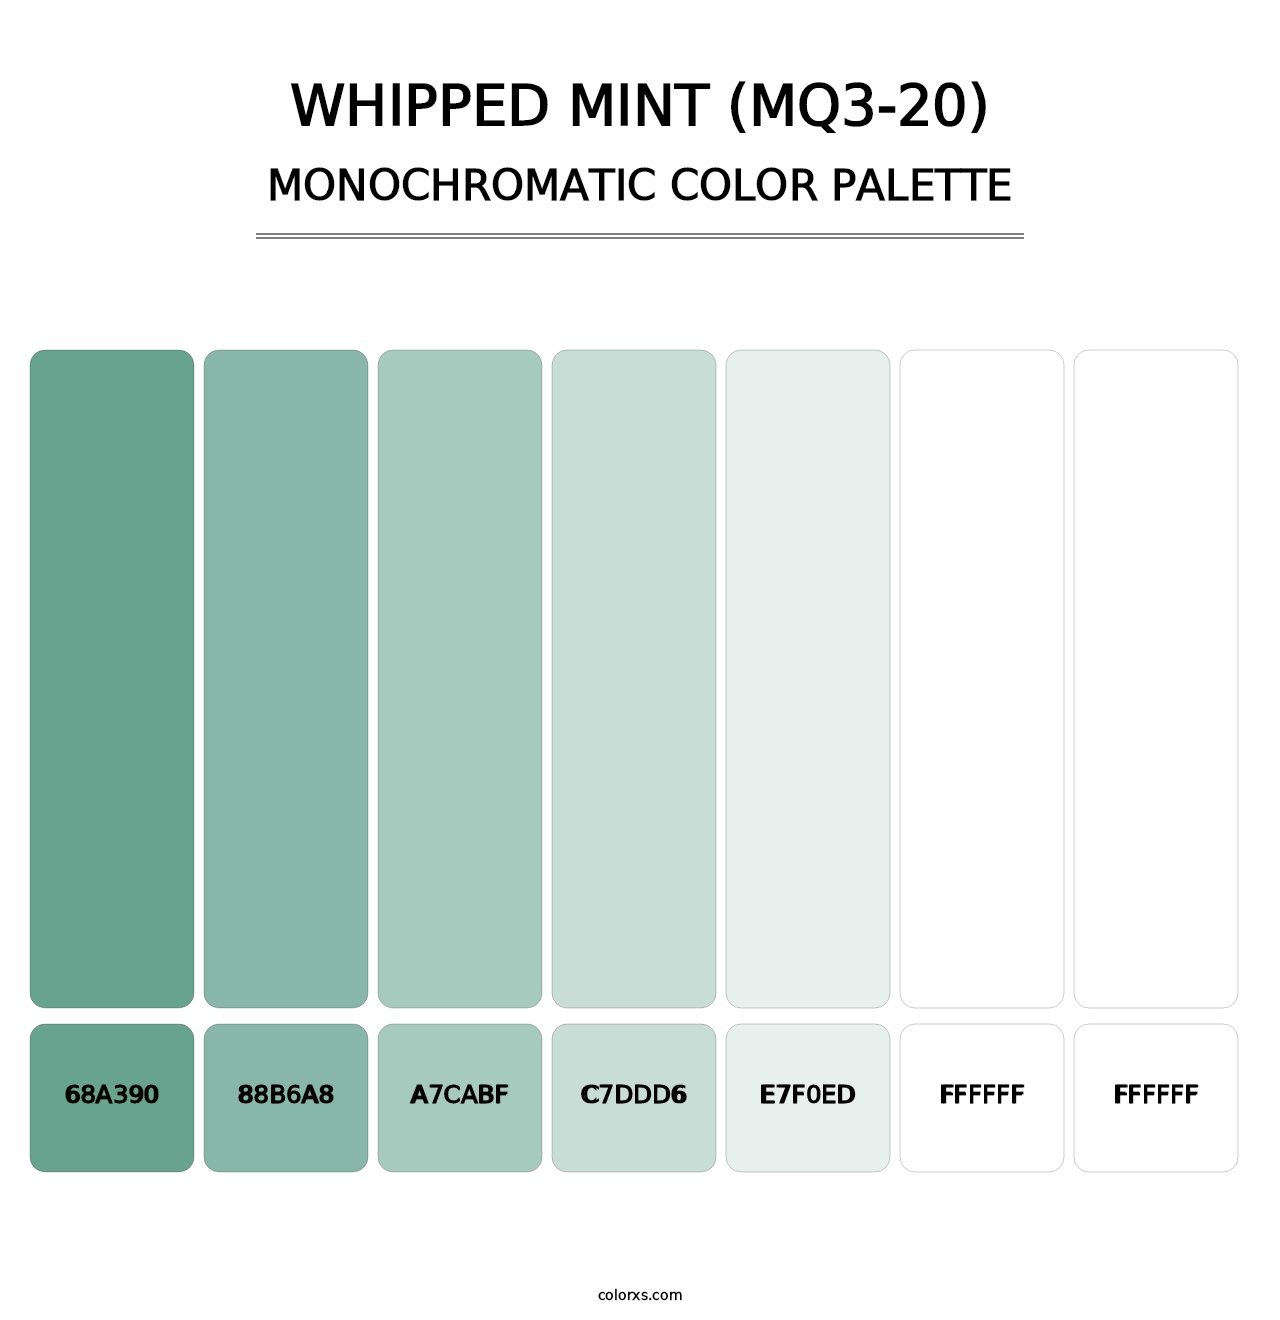 Whipped Mint (MQ3-20) - Monochromatic Color Palette